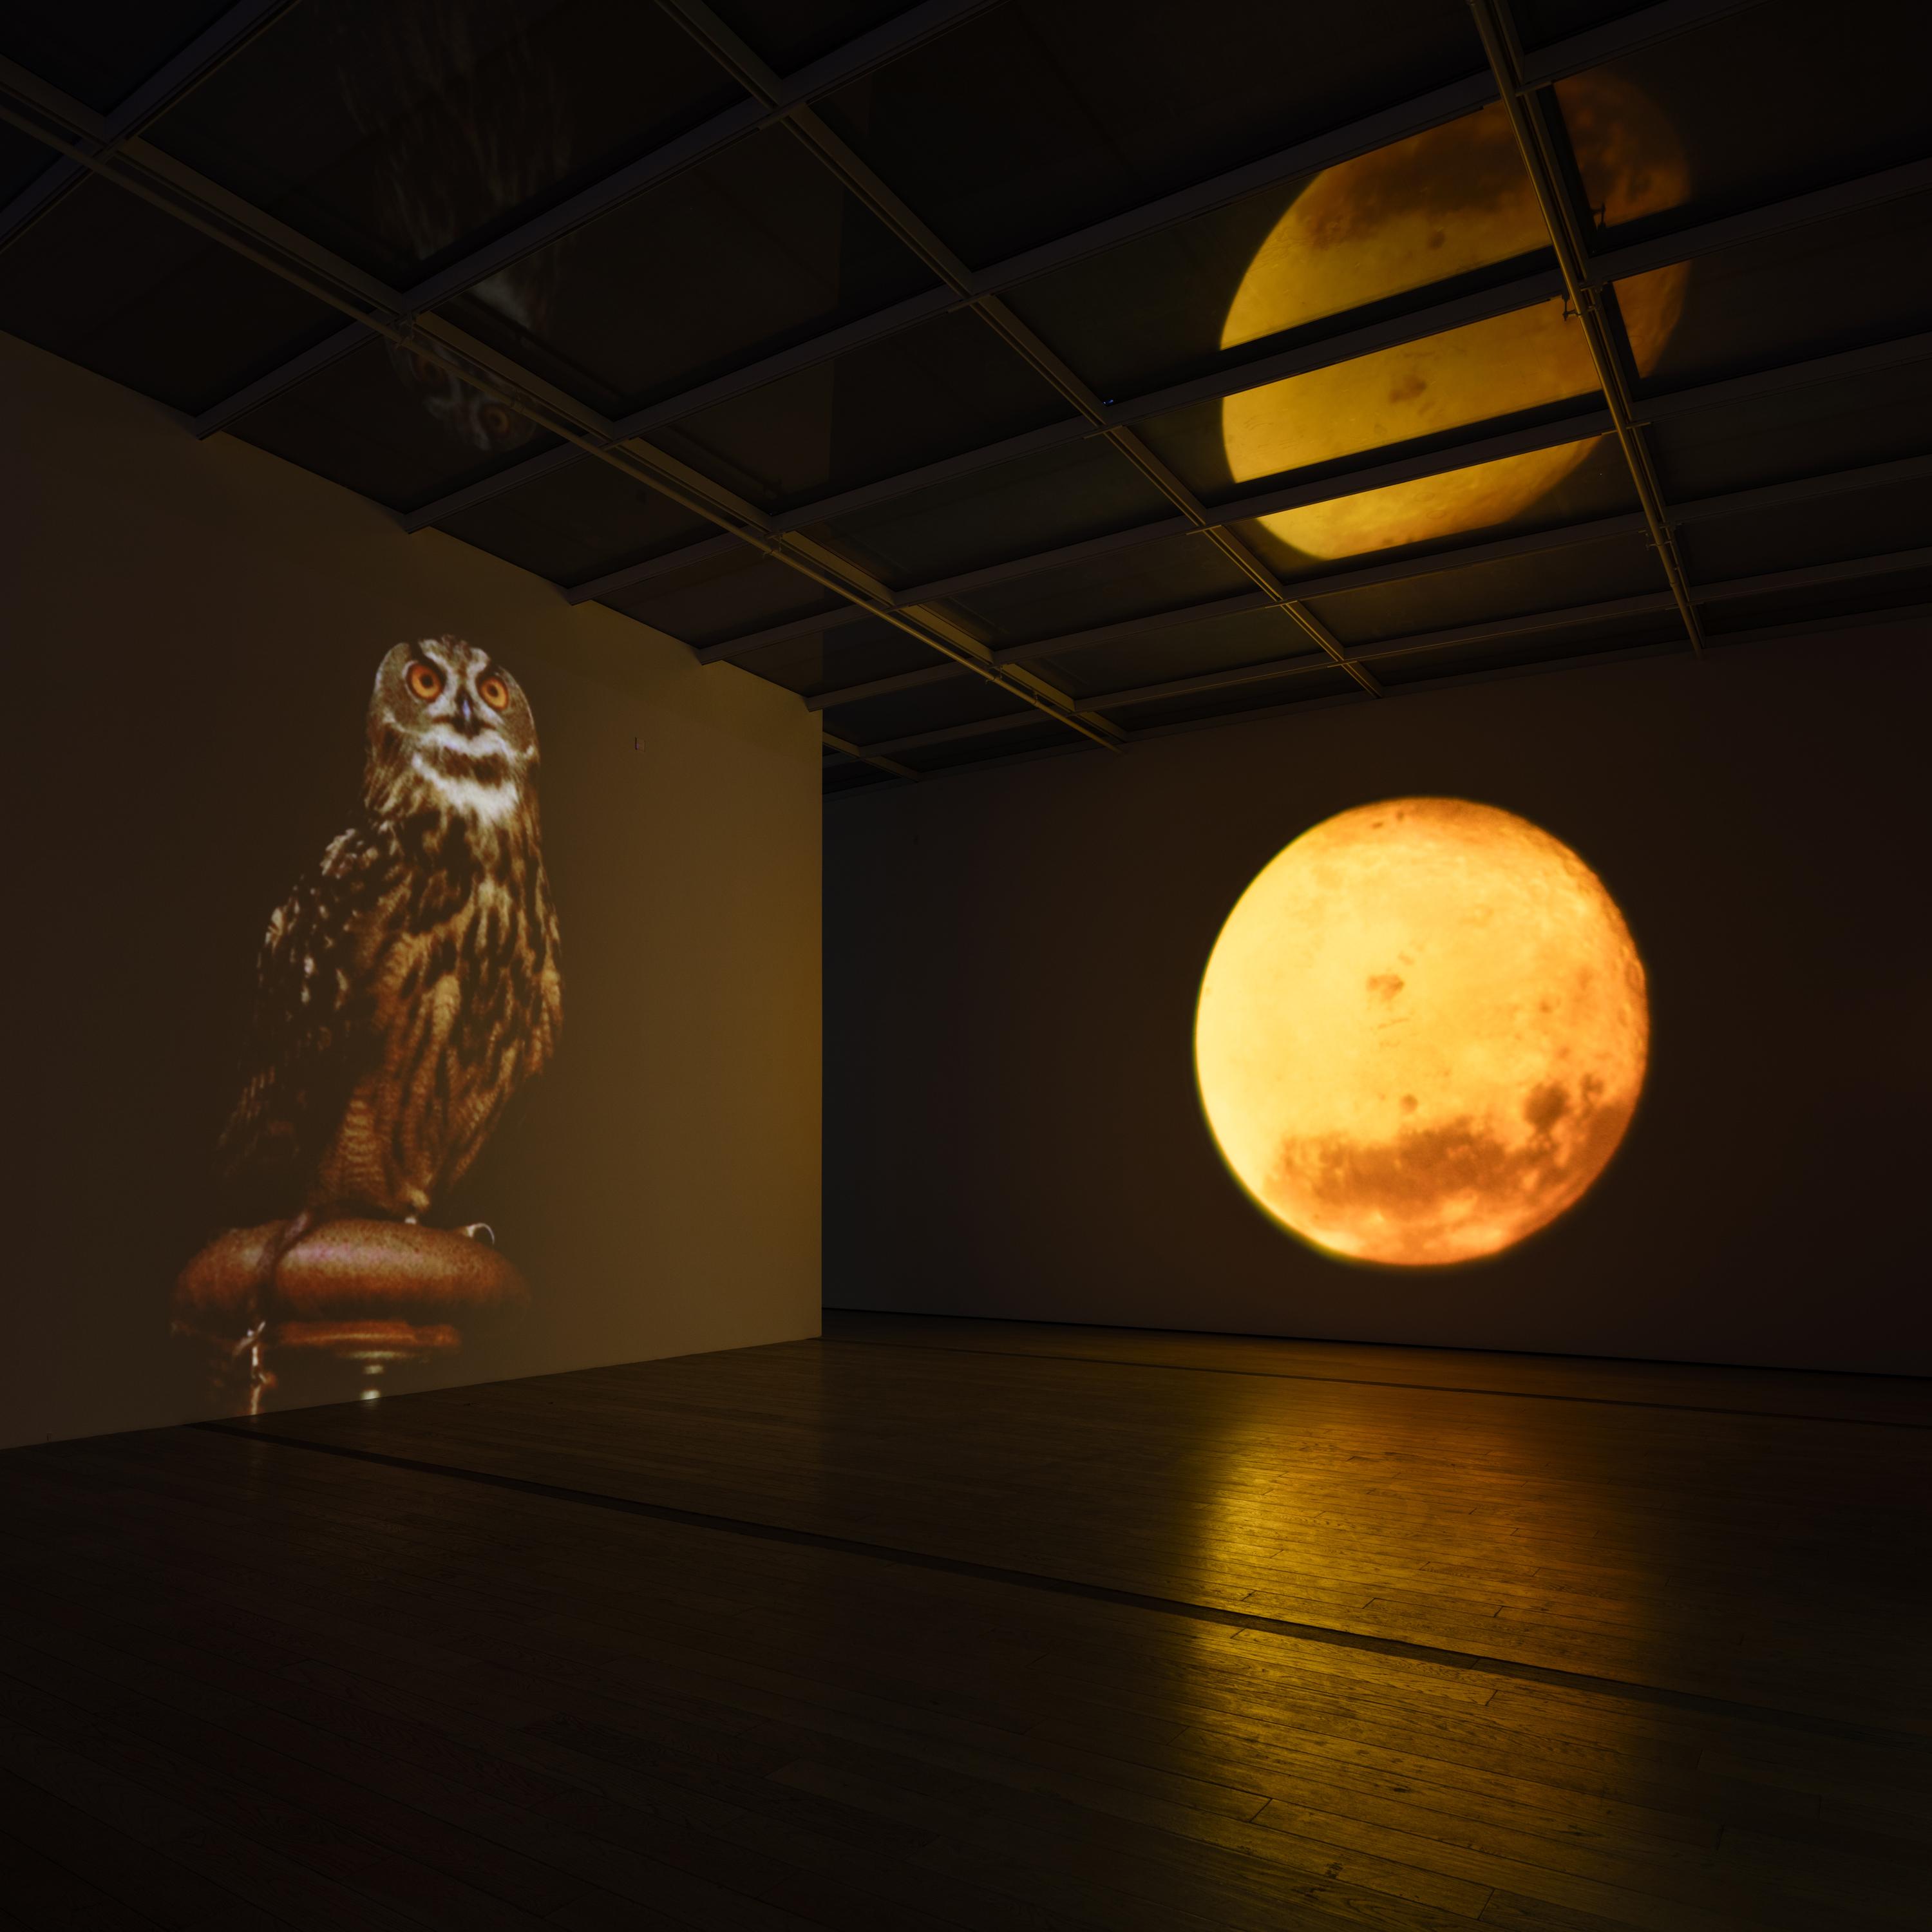 Enormous video projections of an owl and a glowing yellow moon fill two adjoining walls of a dark room.